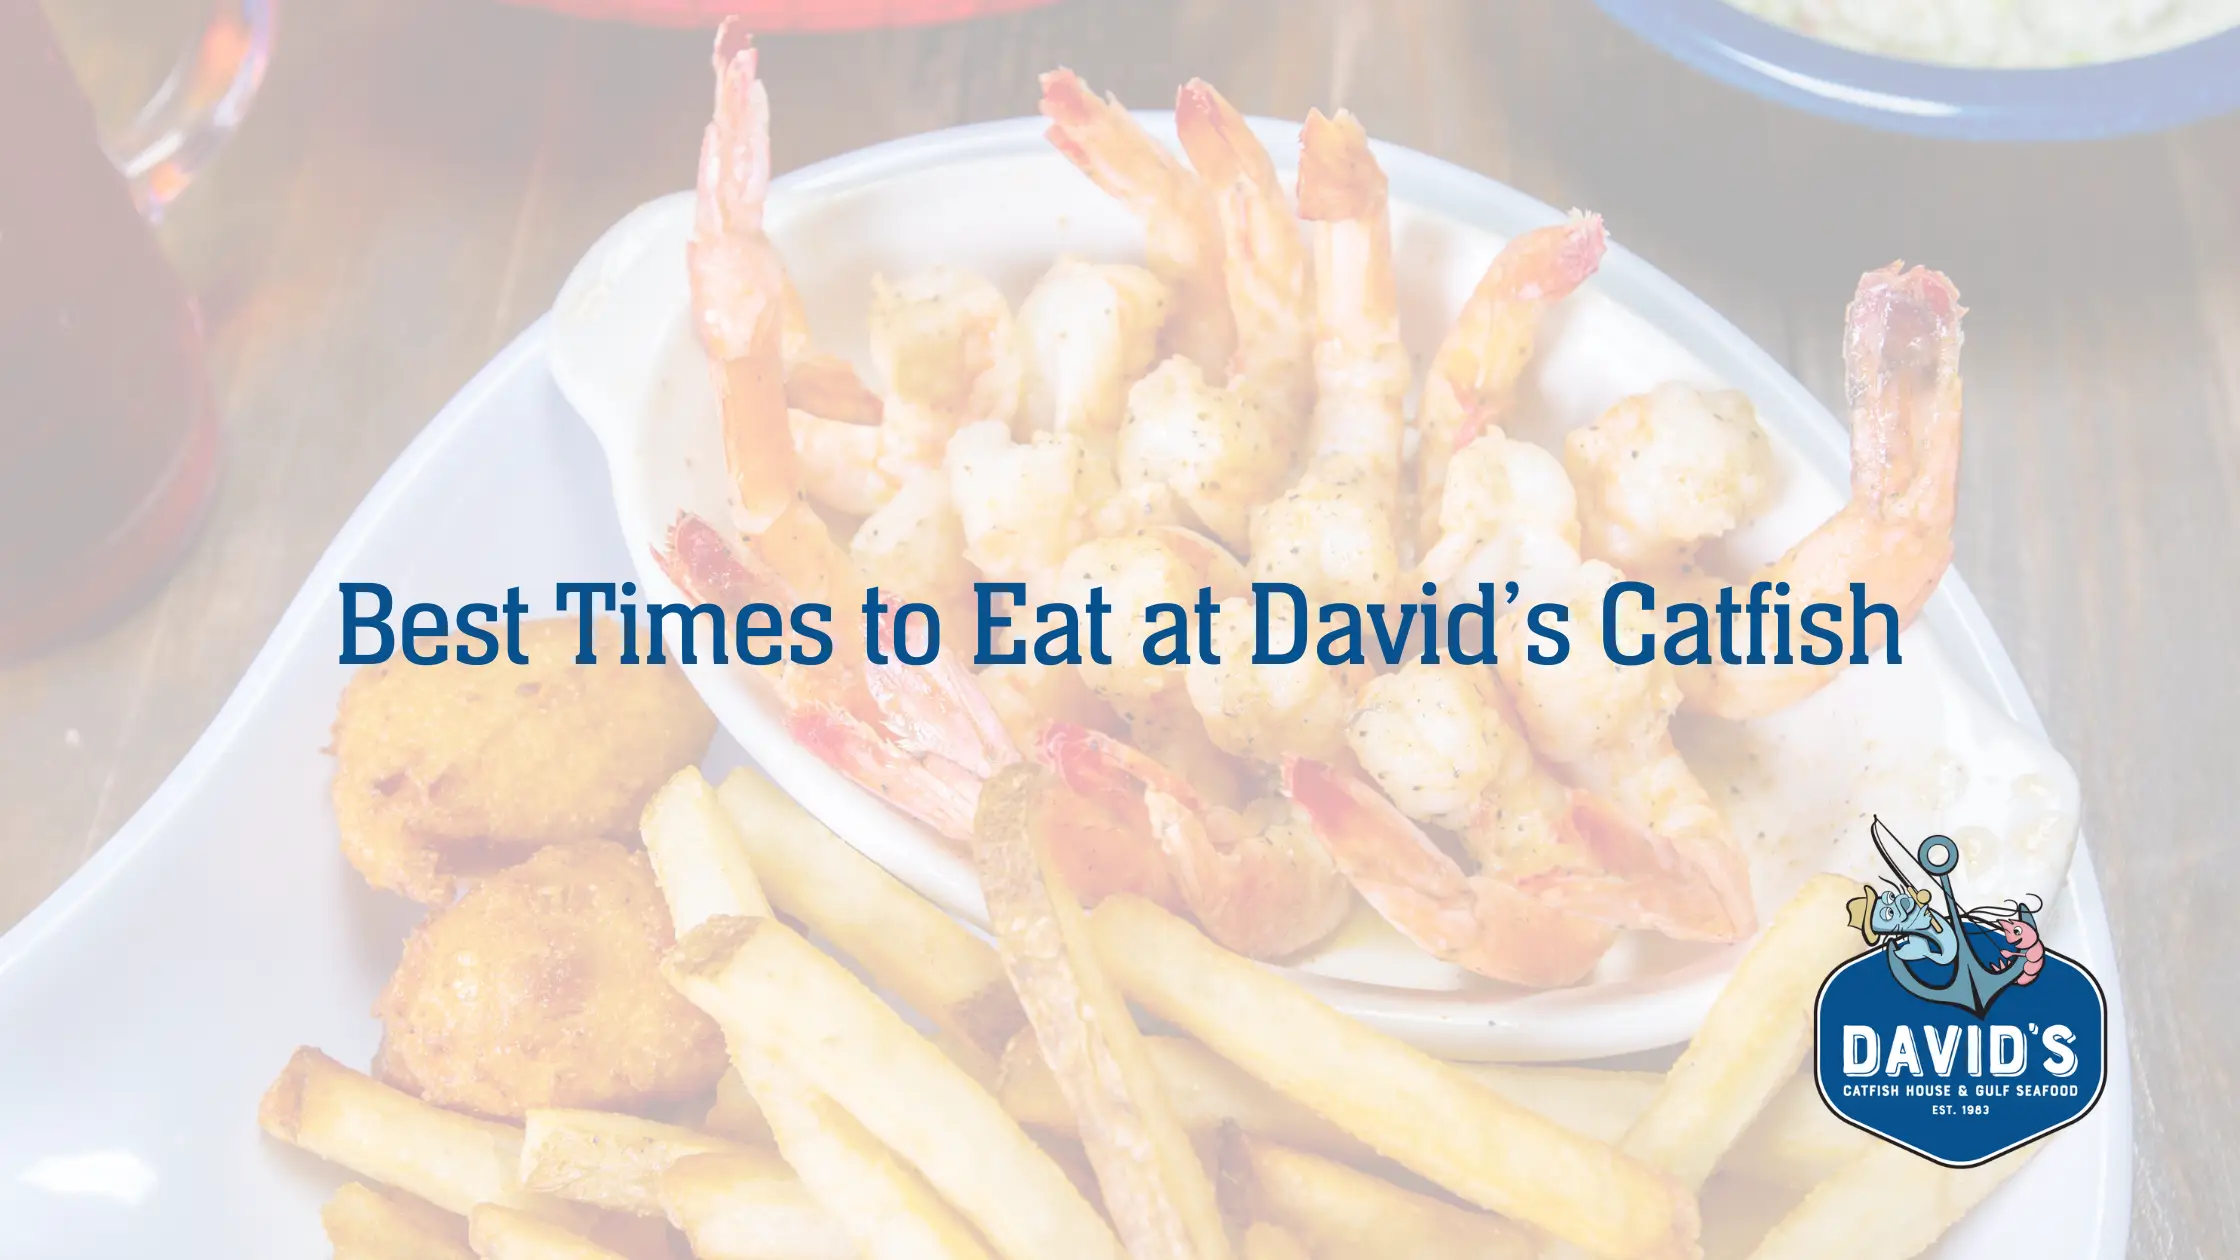 Best Times to Eat at David's Catfish